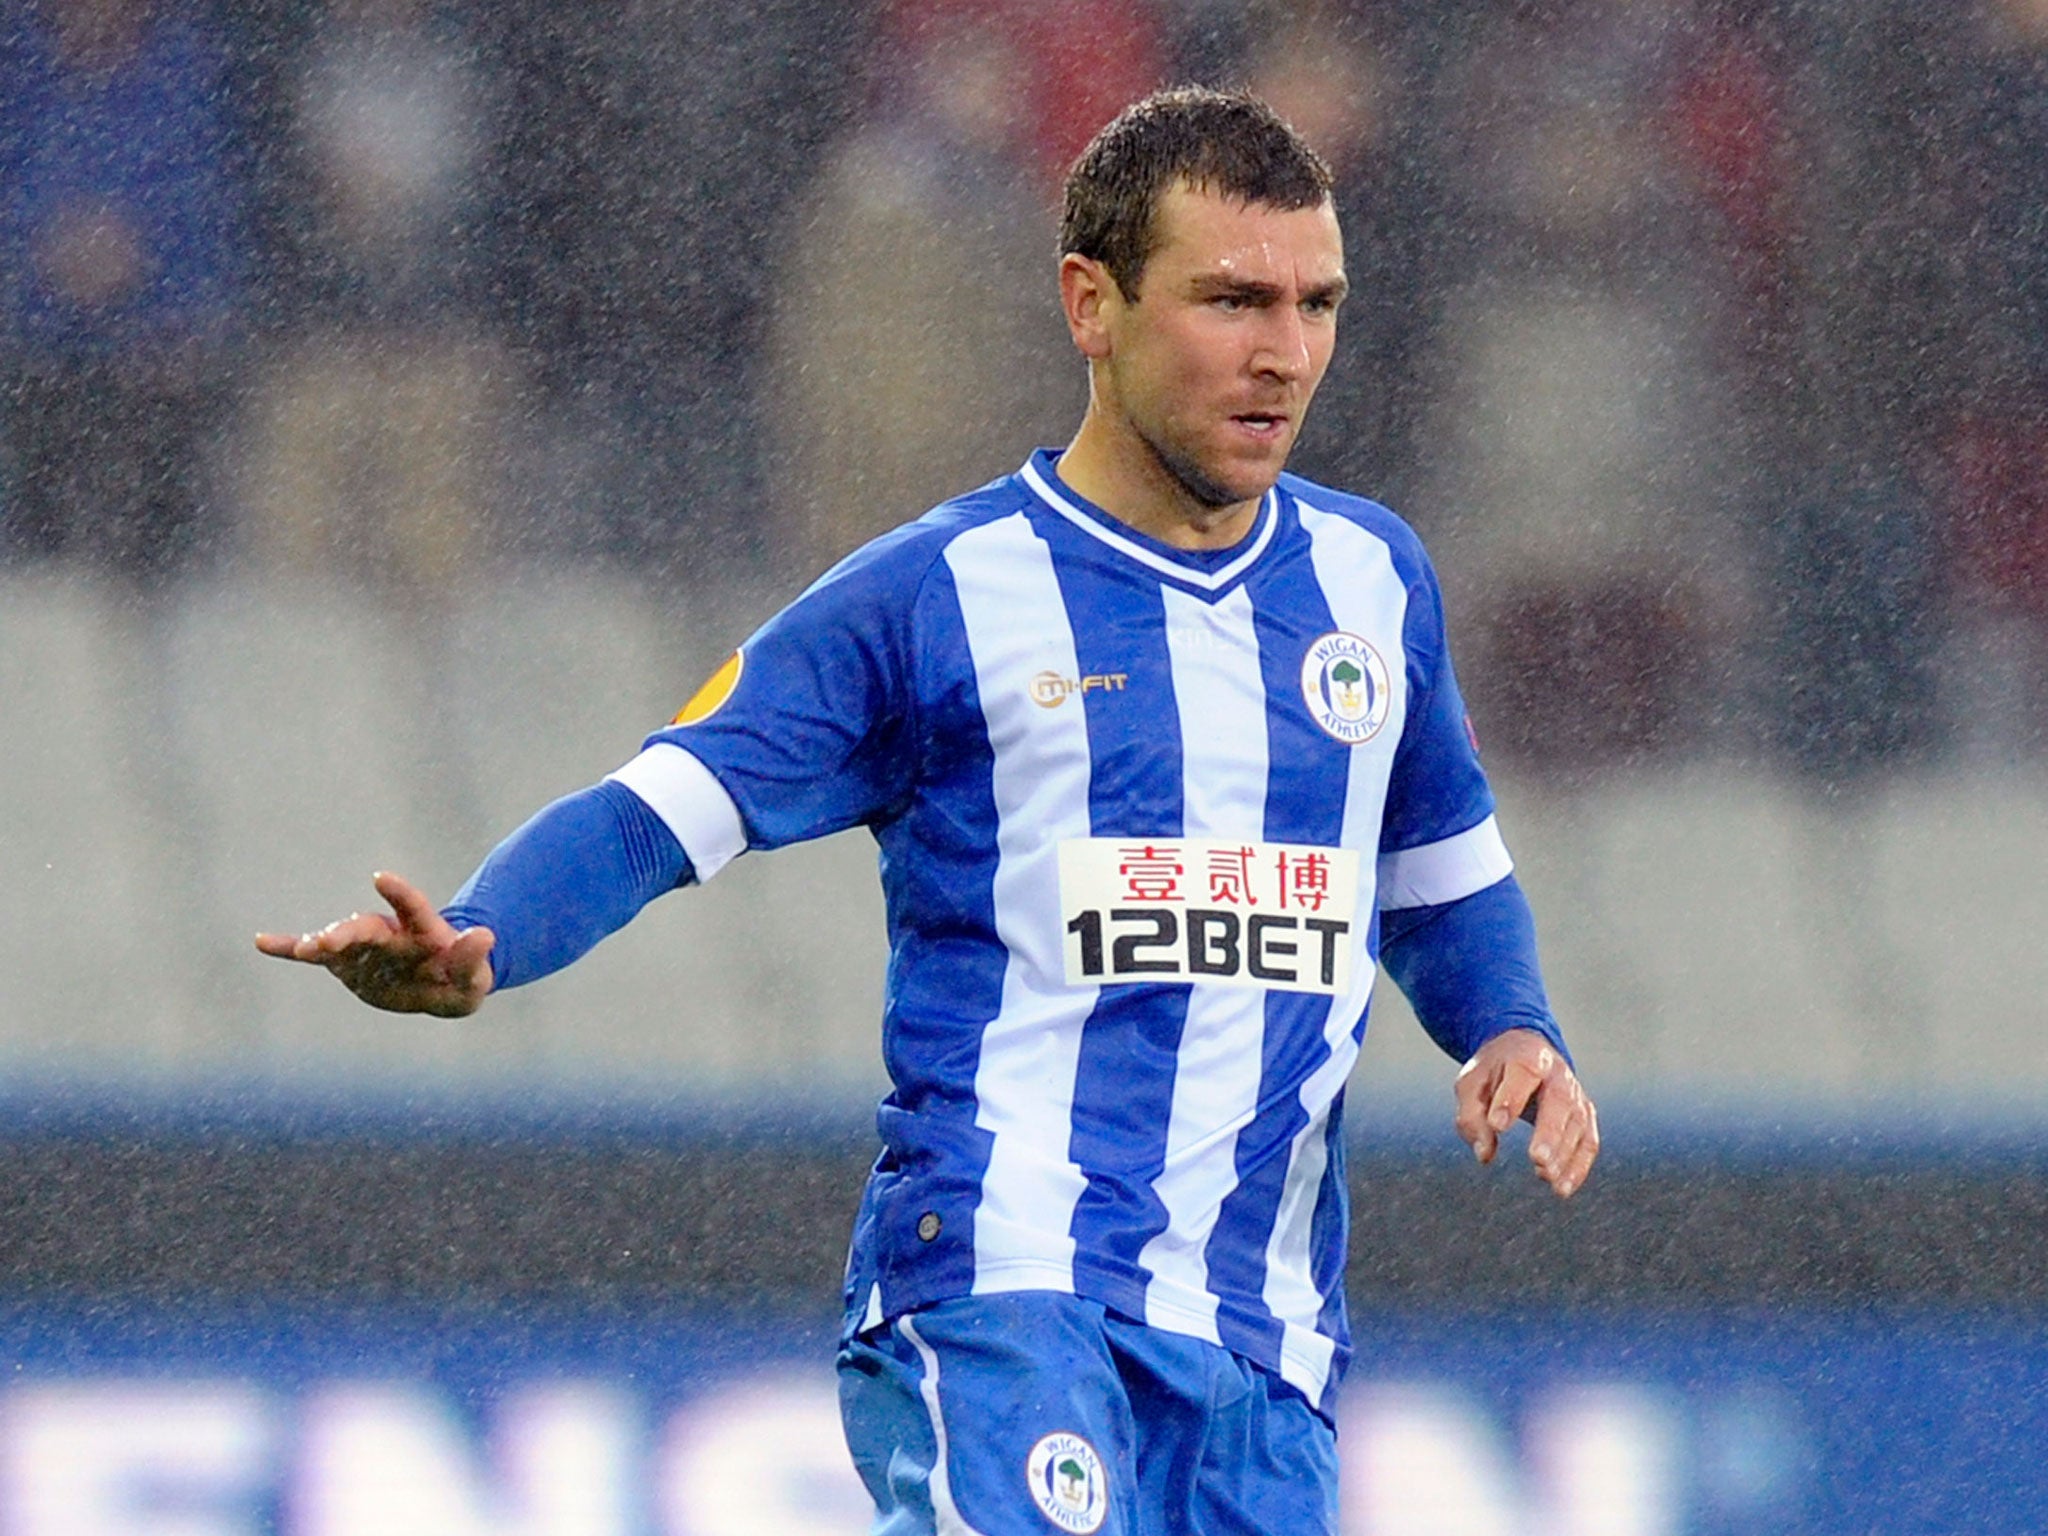 Wigan midfielder James McArthur is hoping to produce something special against Rubin Kazan in the Europa League